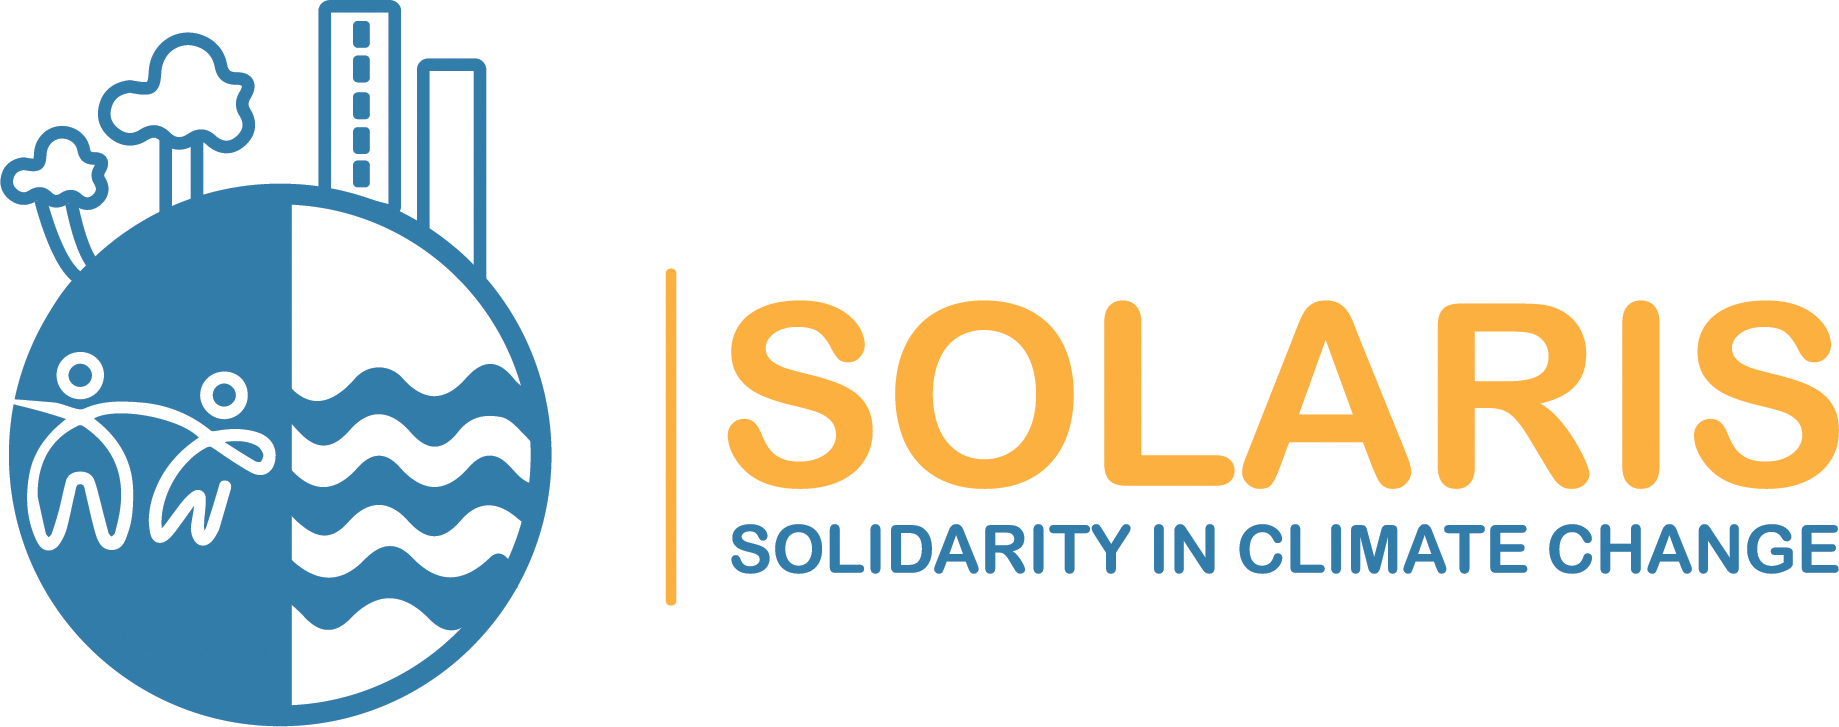 Presentation of the Solaris project